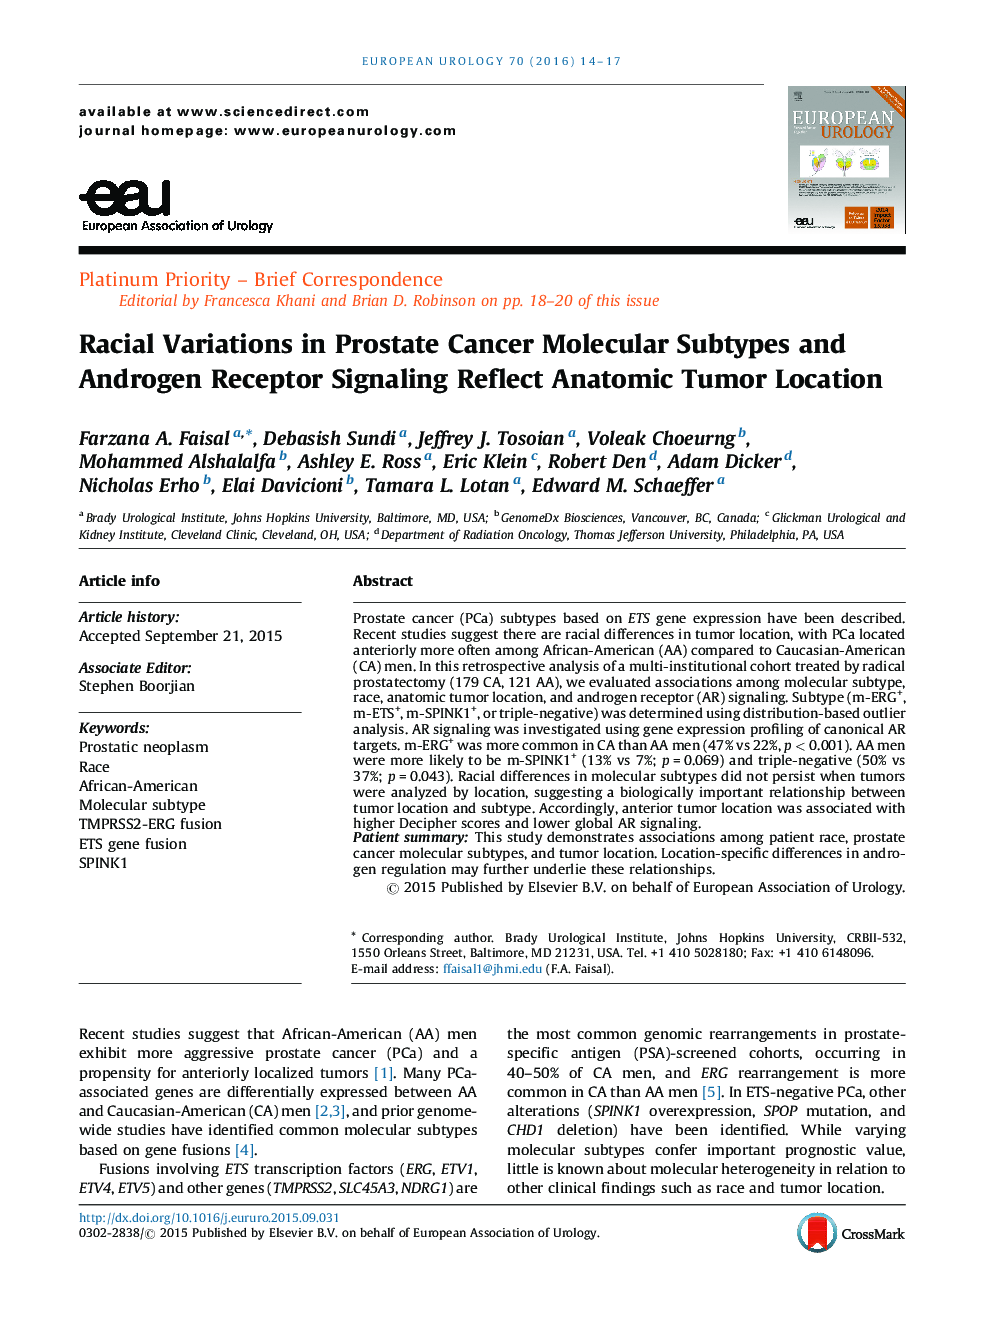 Racial Variations in Prostate Cancer Molecular Subtypes and Androgen Receptor Signaling Reflect Anatomic Tumor Location